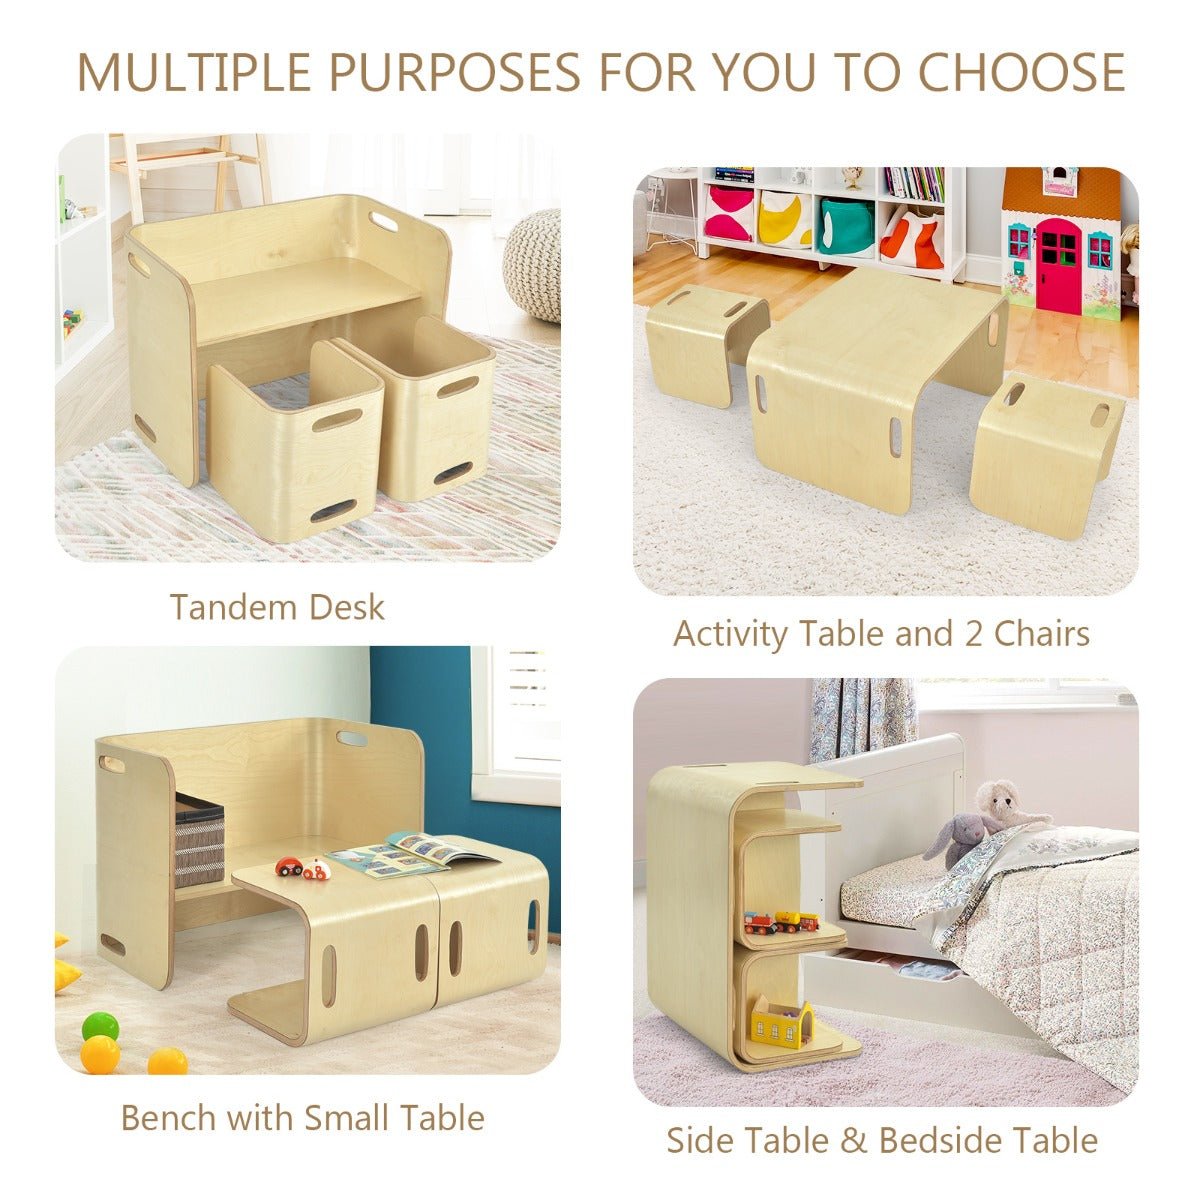 Rediscover Convenience with the Convertible Kids Table and Chair Set - Shop Today!